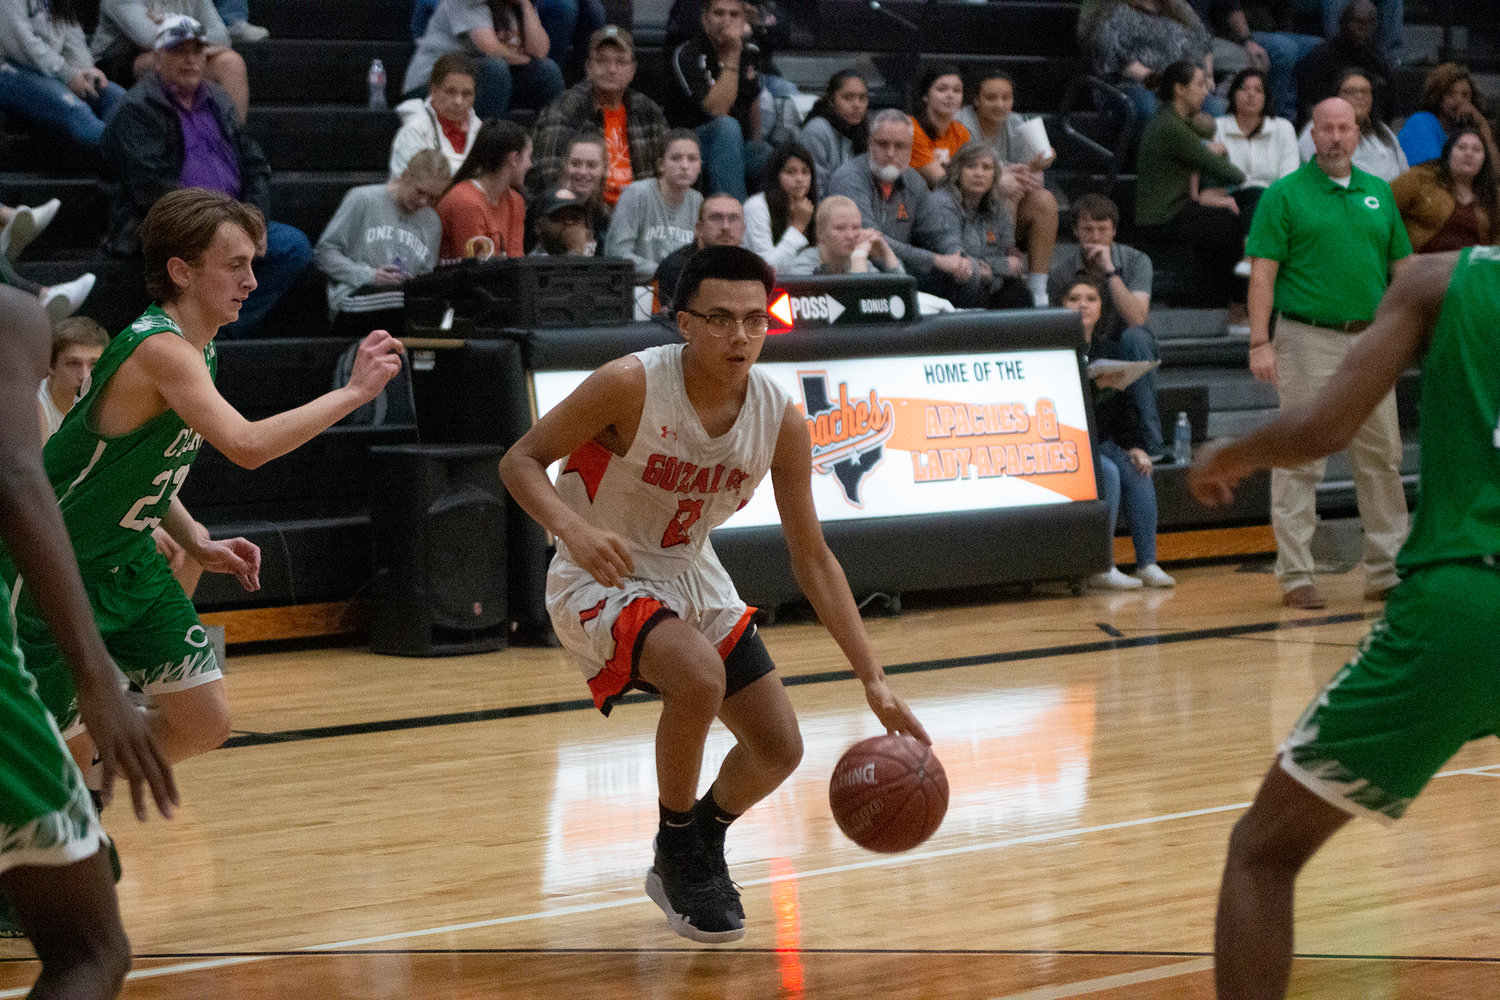 Sophomore guard Xavier Aguayo (2) led the team in scoring with 15 points in Gonzales’ 53-43 loss against Cuero last Friday.